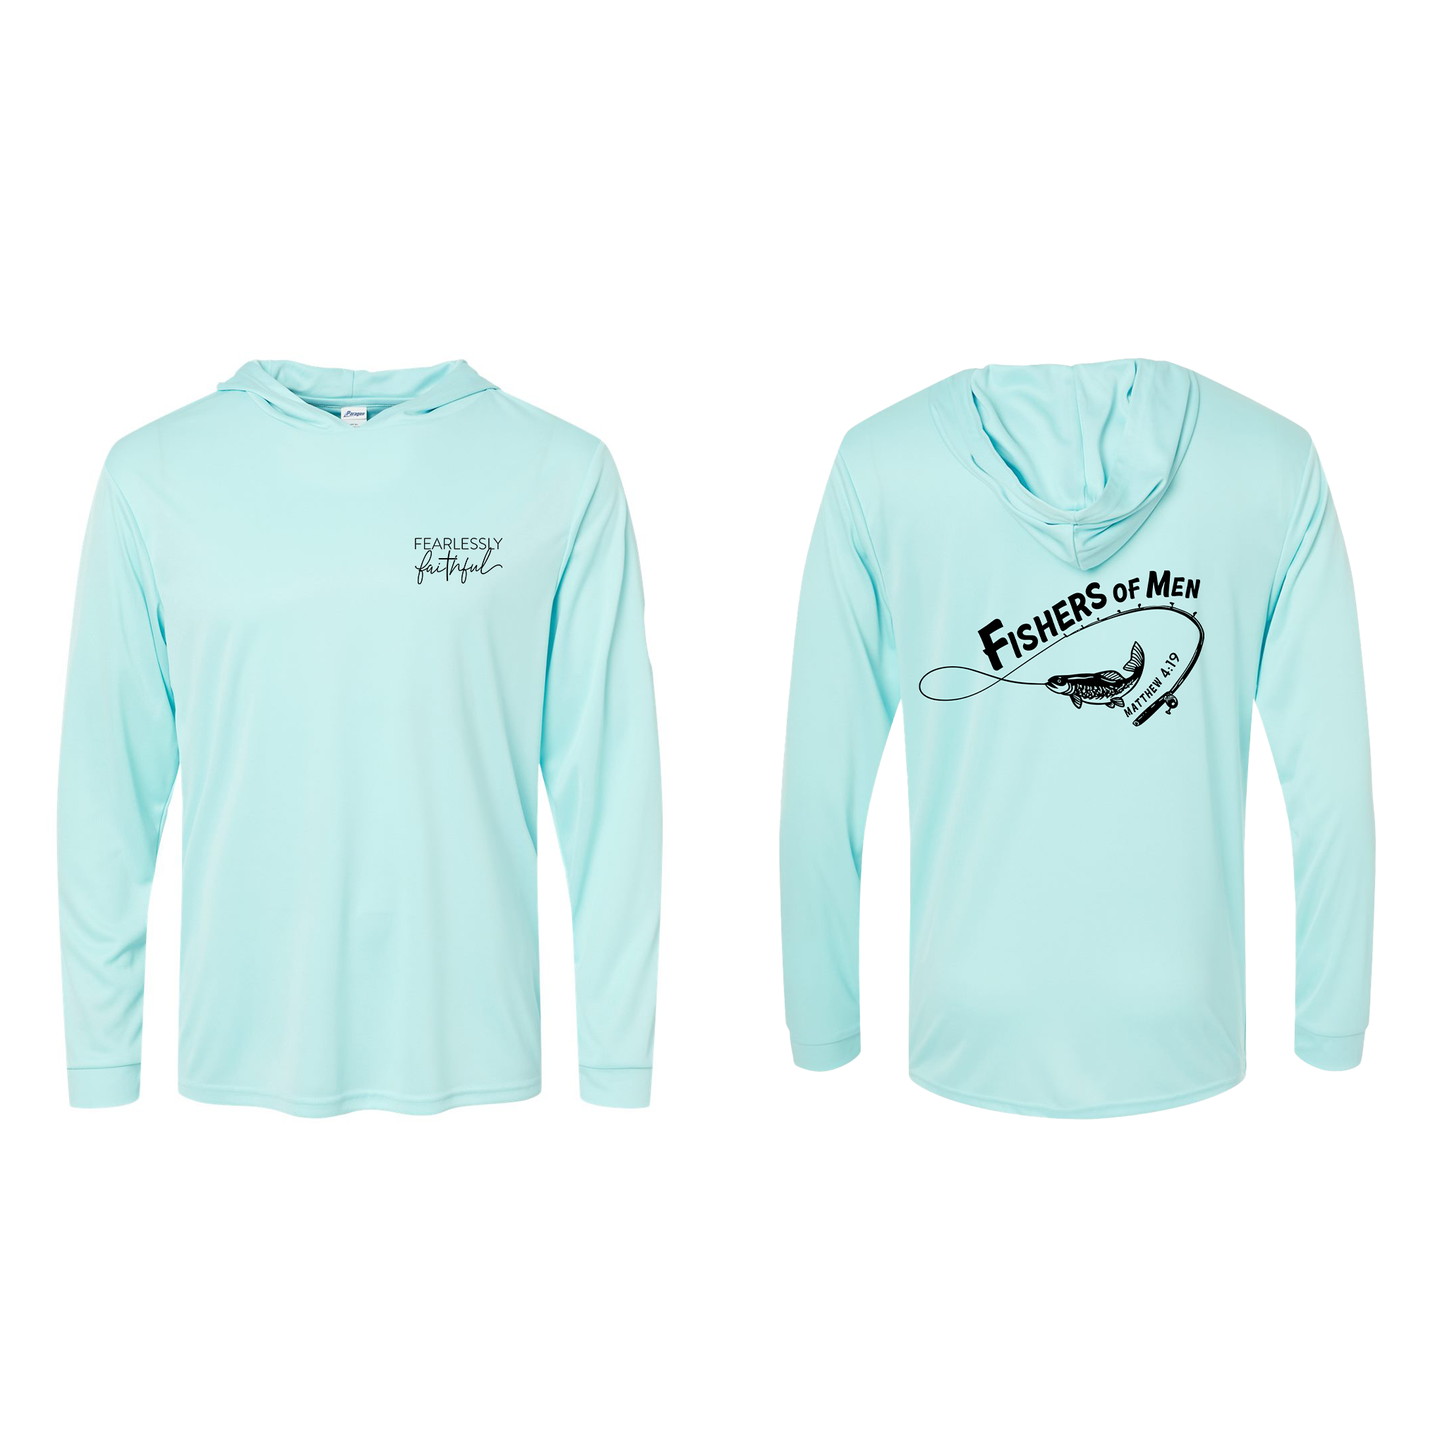 Fishers Of Men Performance Long Sleeve – Fearlessly Faithful